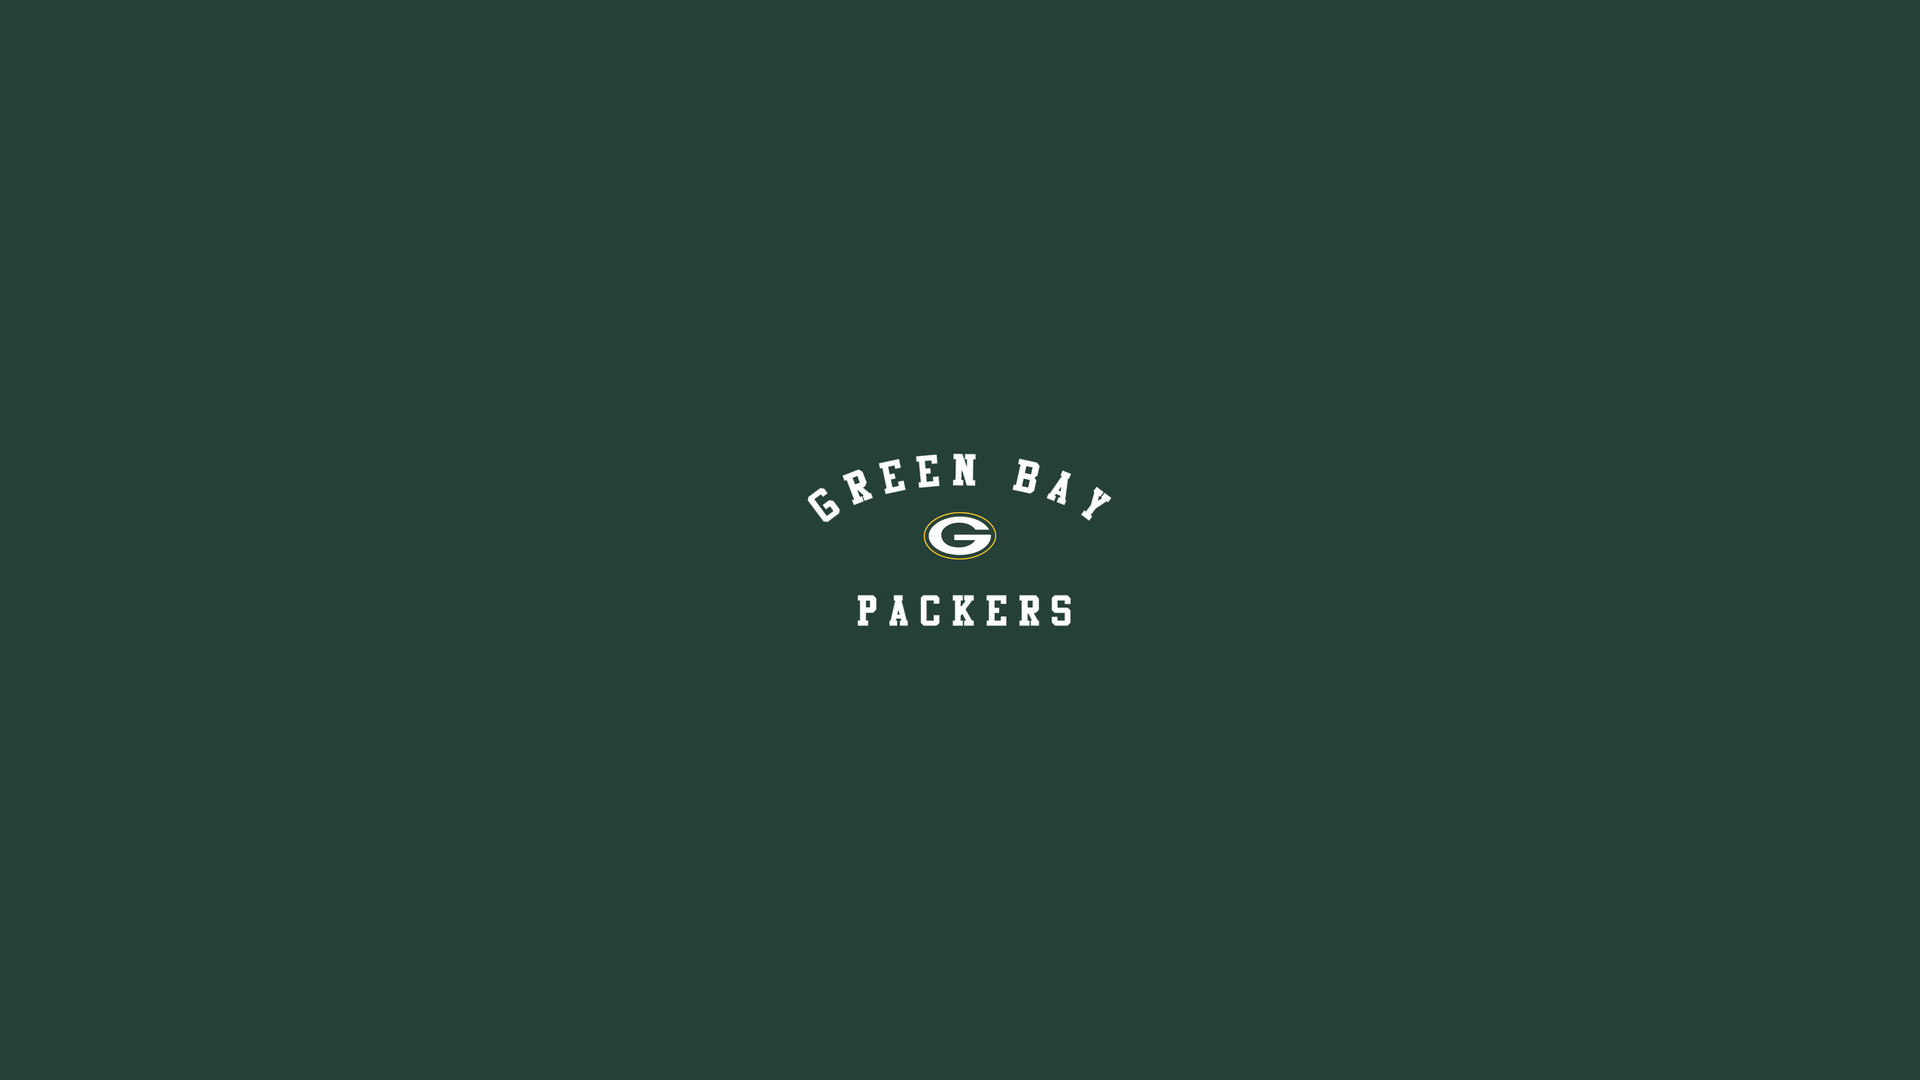 1920x1080 1600x1200 free computer wallpaper for green bay packers .